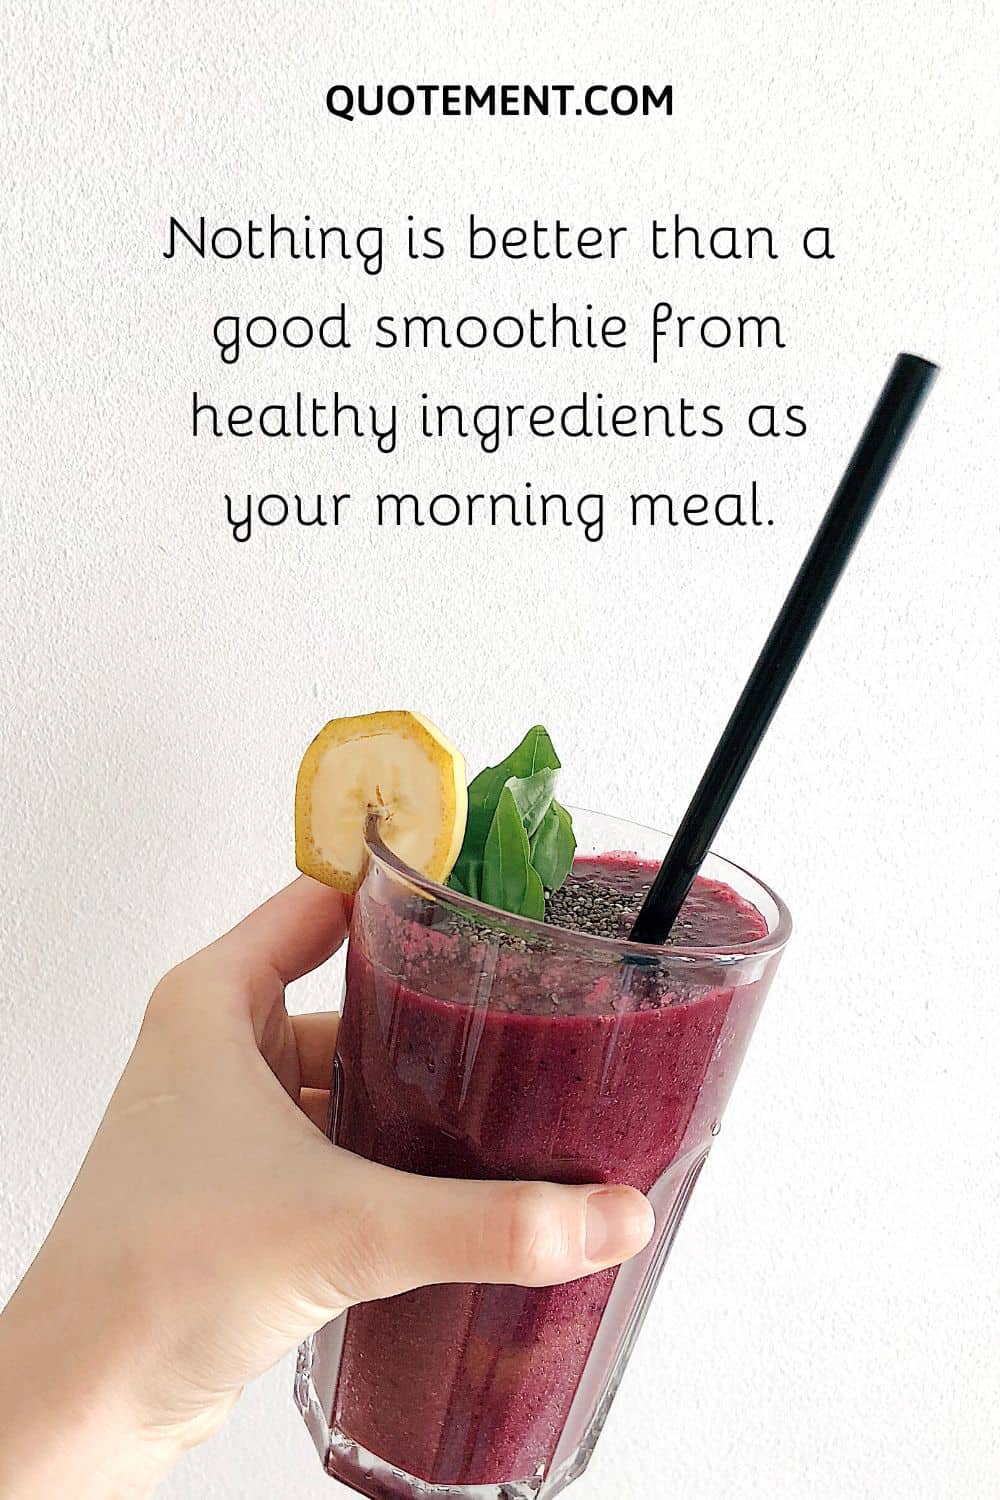 Nothing is better than a good smoothie from healthy ingredients as your morning meal.